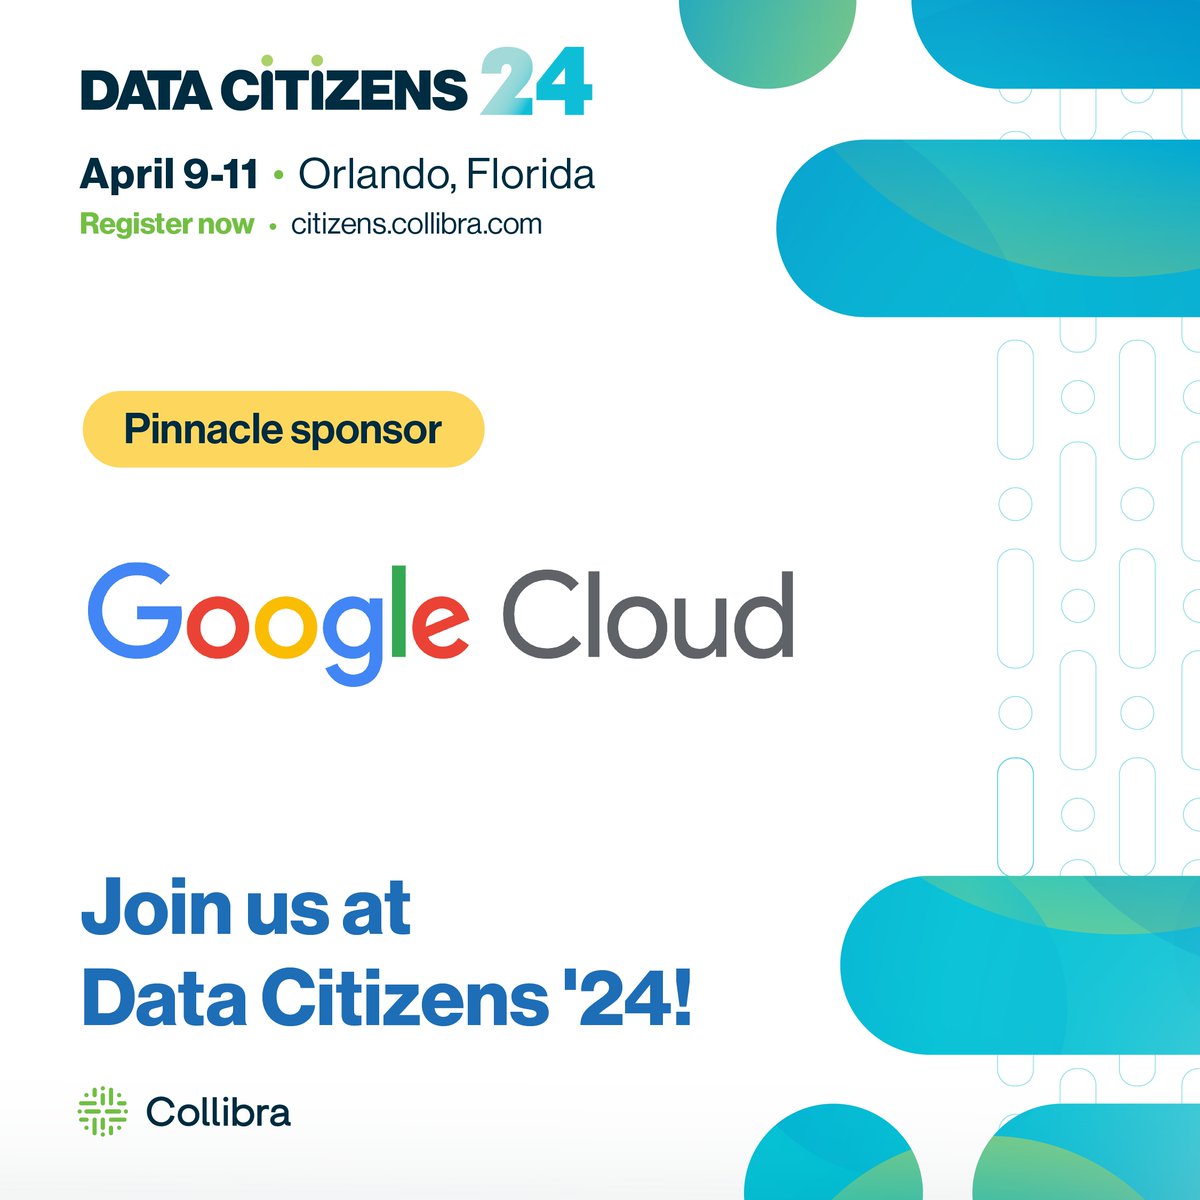 We are excited to announce that we are an official Pinnacle sponsor at this year’s #DataCitizens hosted by @Collibra! Find us at the @GoogleCloud booth to discuss AI powered by Data Intelligence and more!